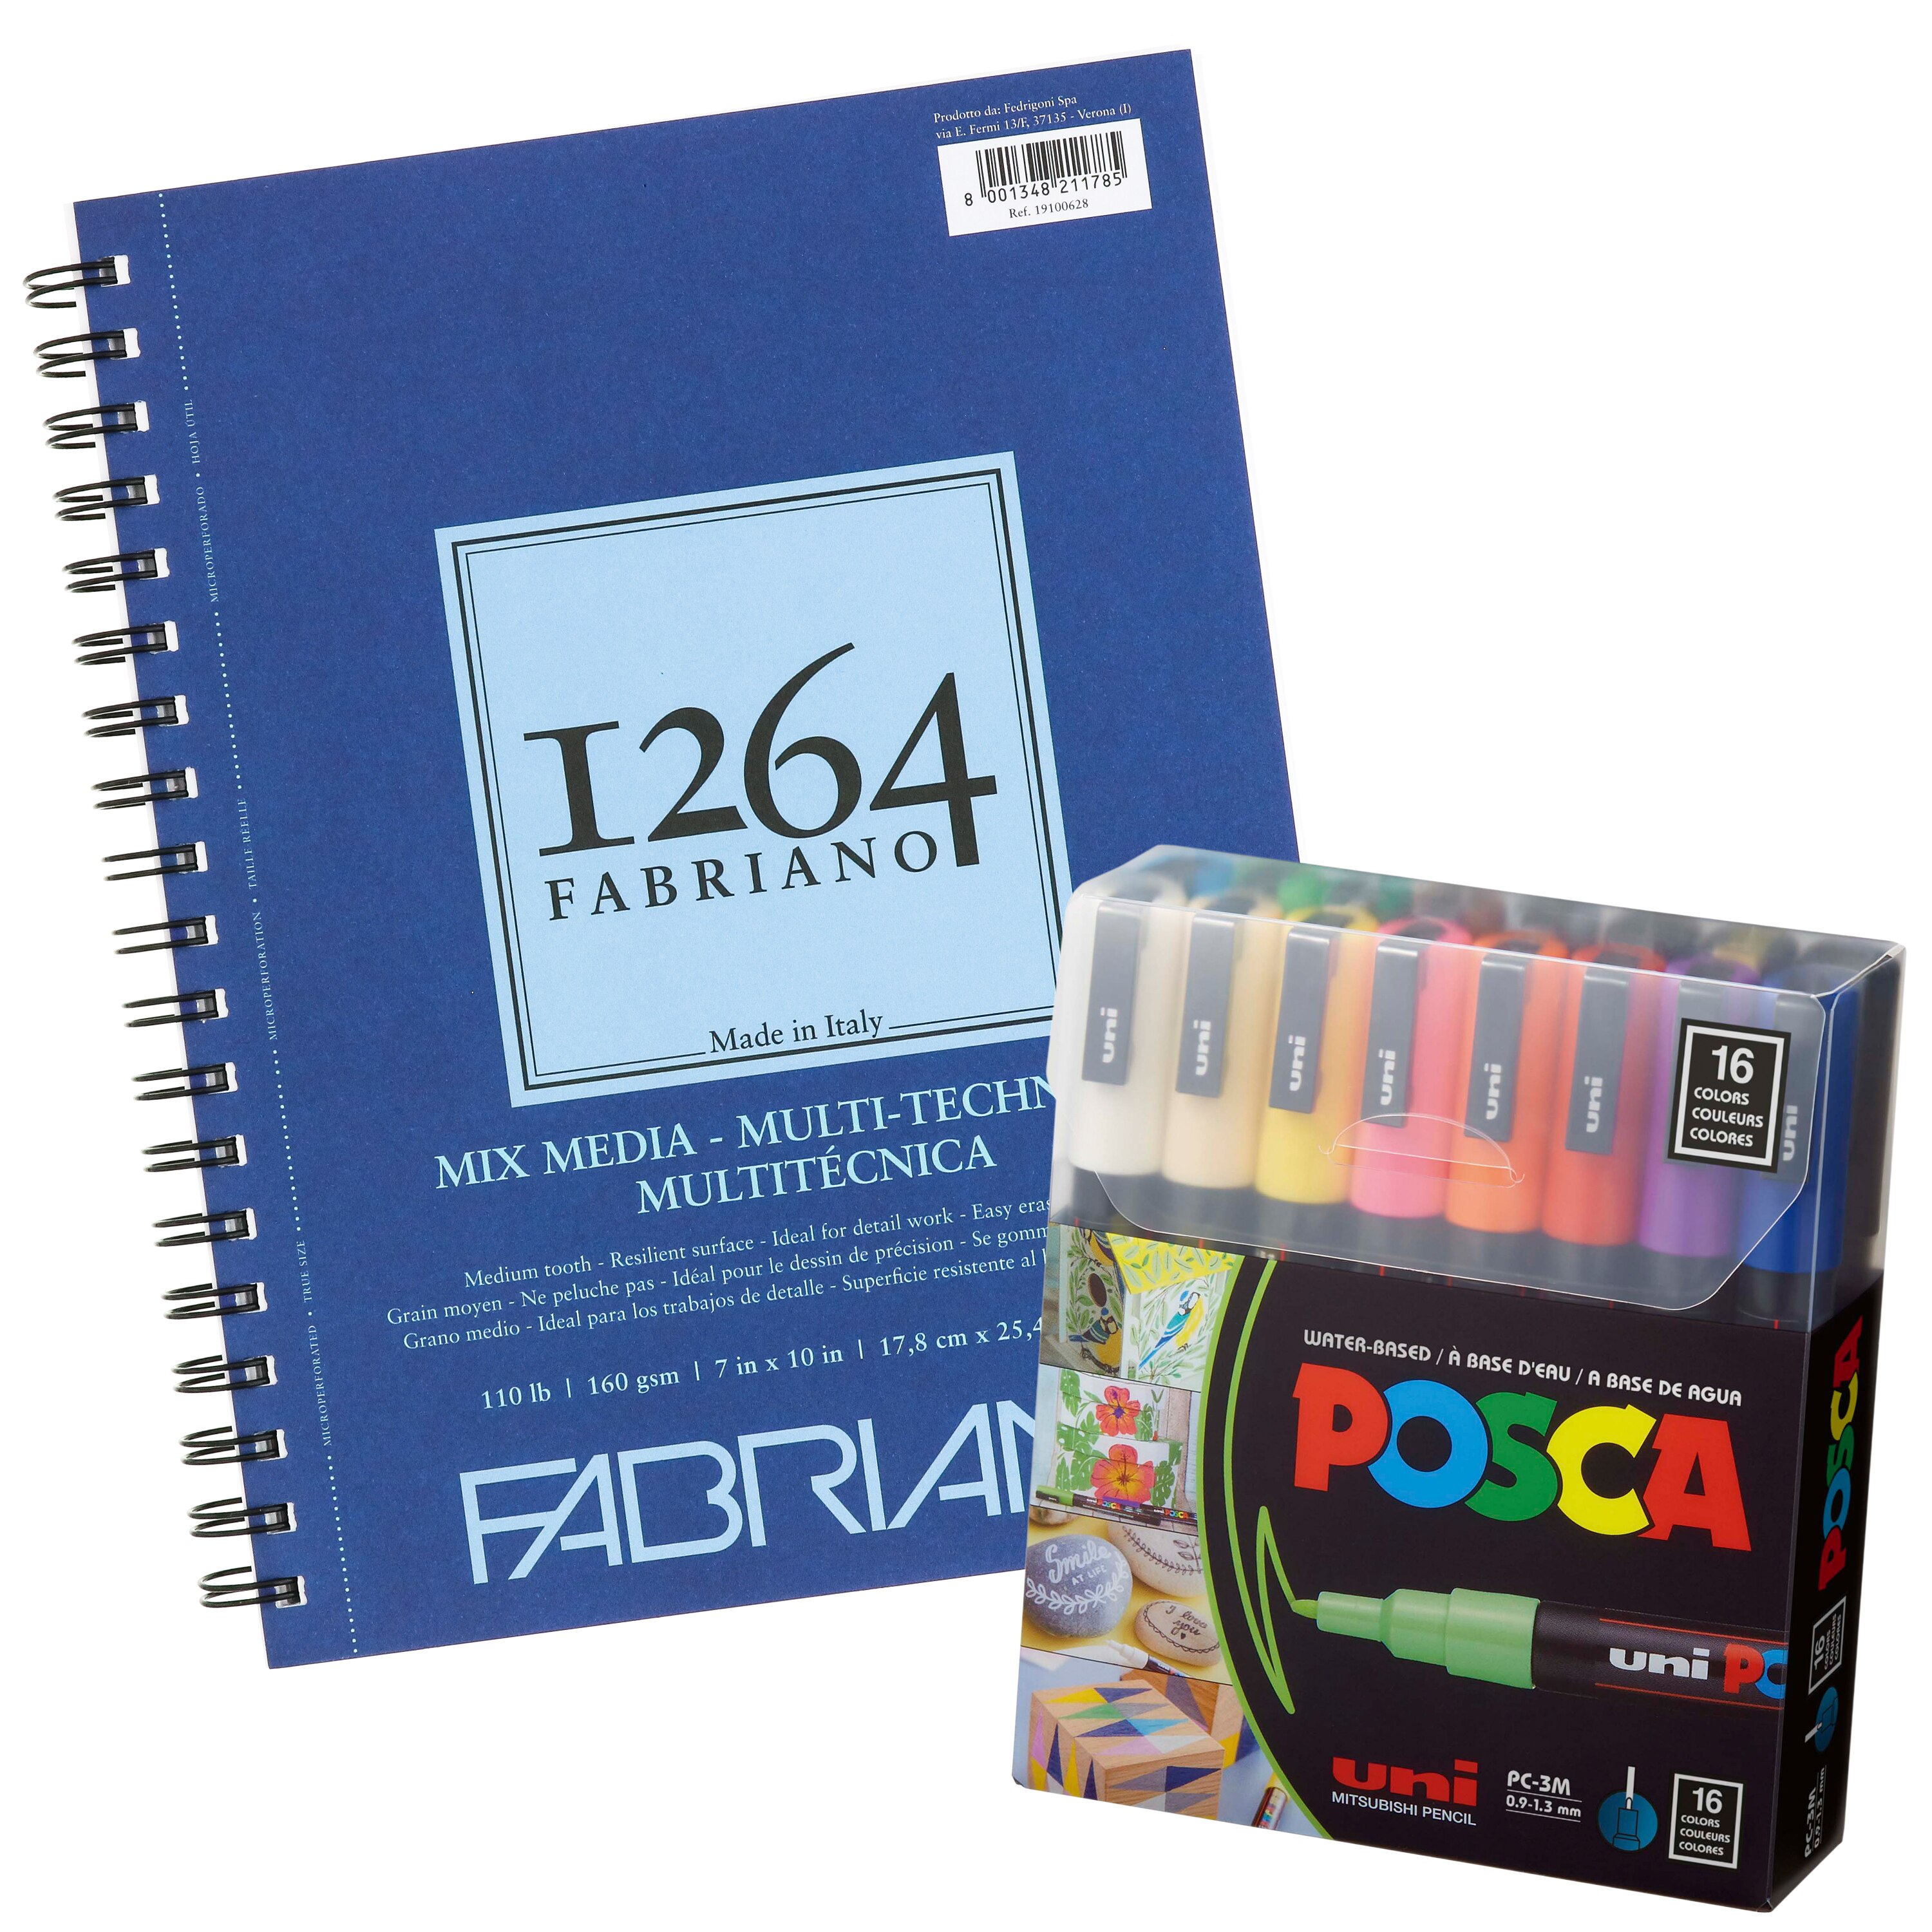 Fabriano 1264 Mixed Media Pad, and POSCA Marker 16-Color PC-3M Fine Pt Bundle